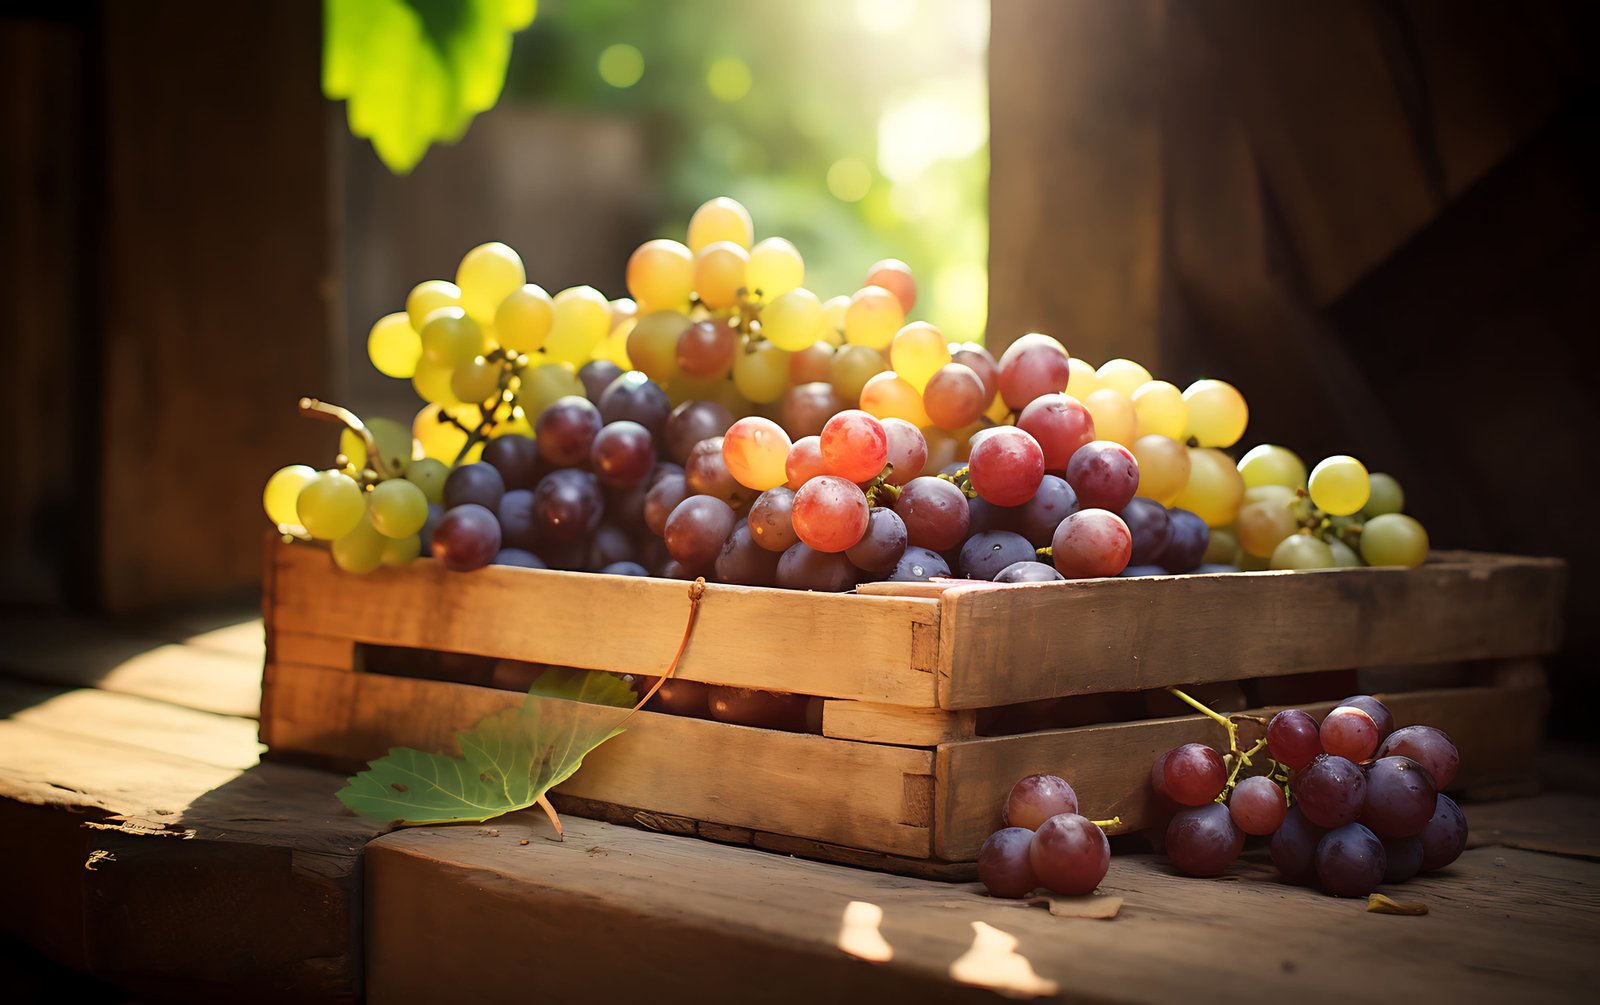 Are Grapes Good For Weight Loss?